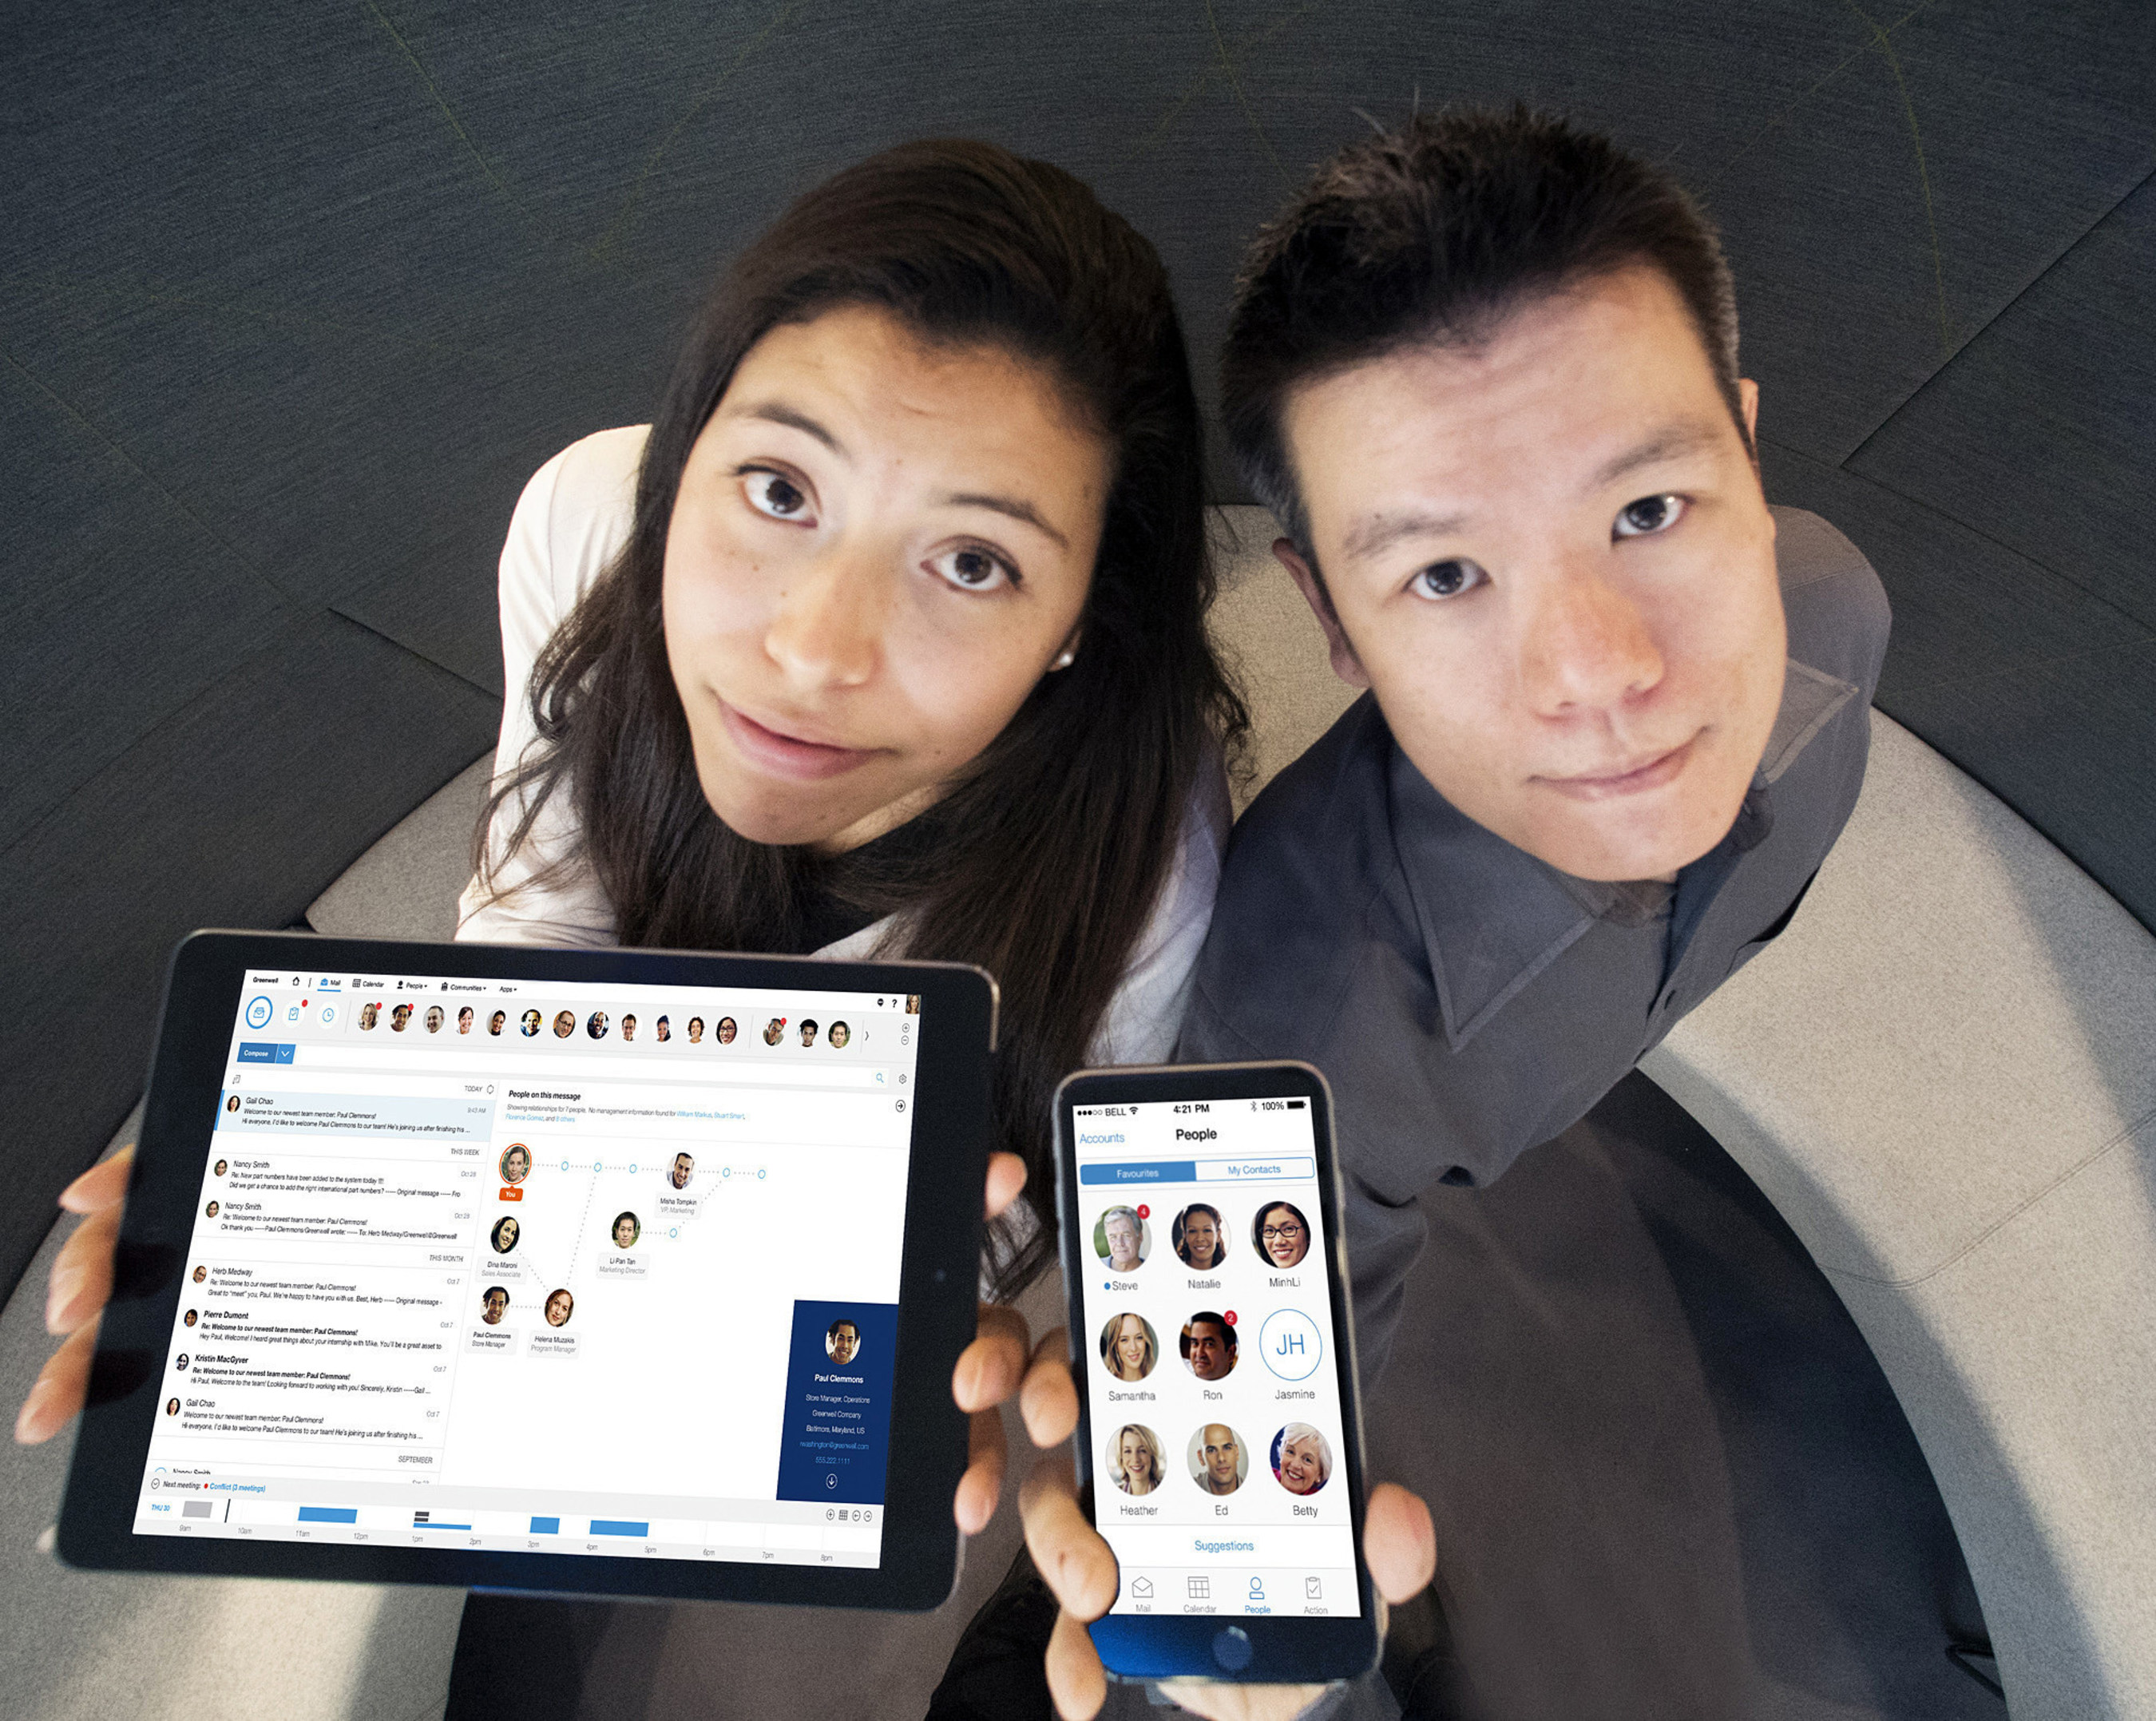 At IBM's Design Studio in New York City's Silicon Alley, employees Catherine Gillespie and Kevin Chiu demonstrate IBM Verse, a new social email app that uses analytics technology to prioritize important tasks and manage social relationships, on Tuesday, November 18, 2014.